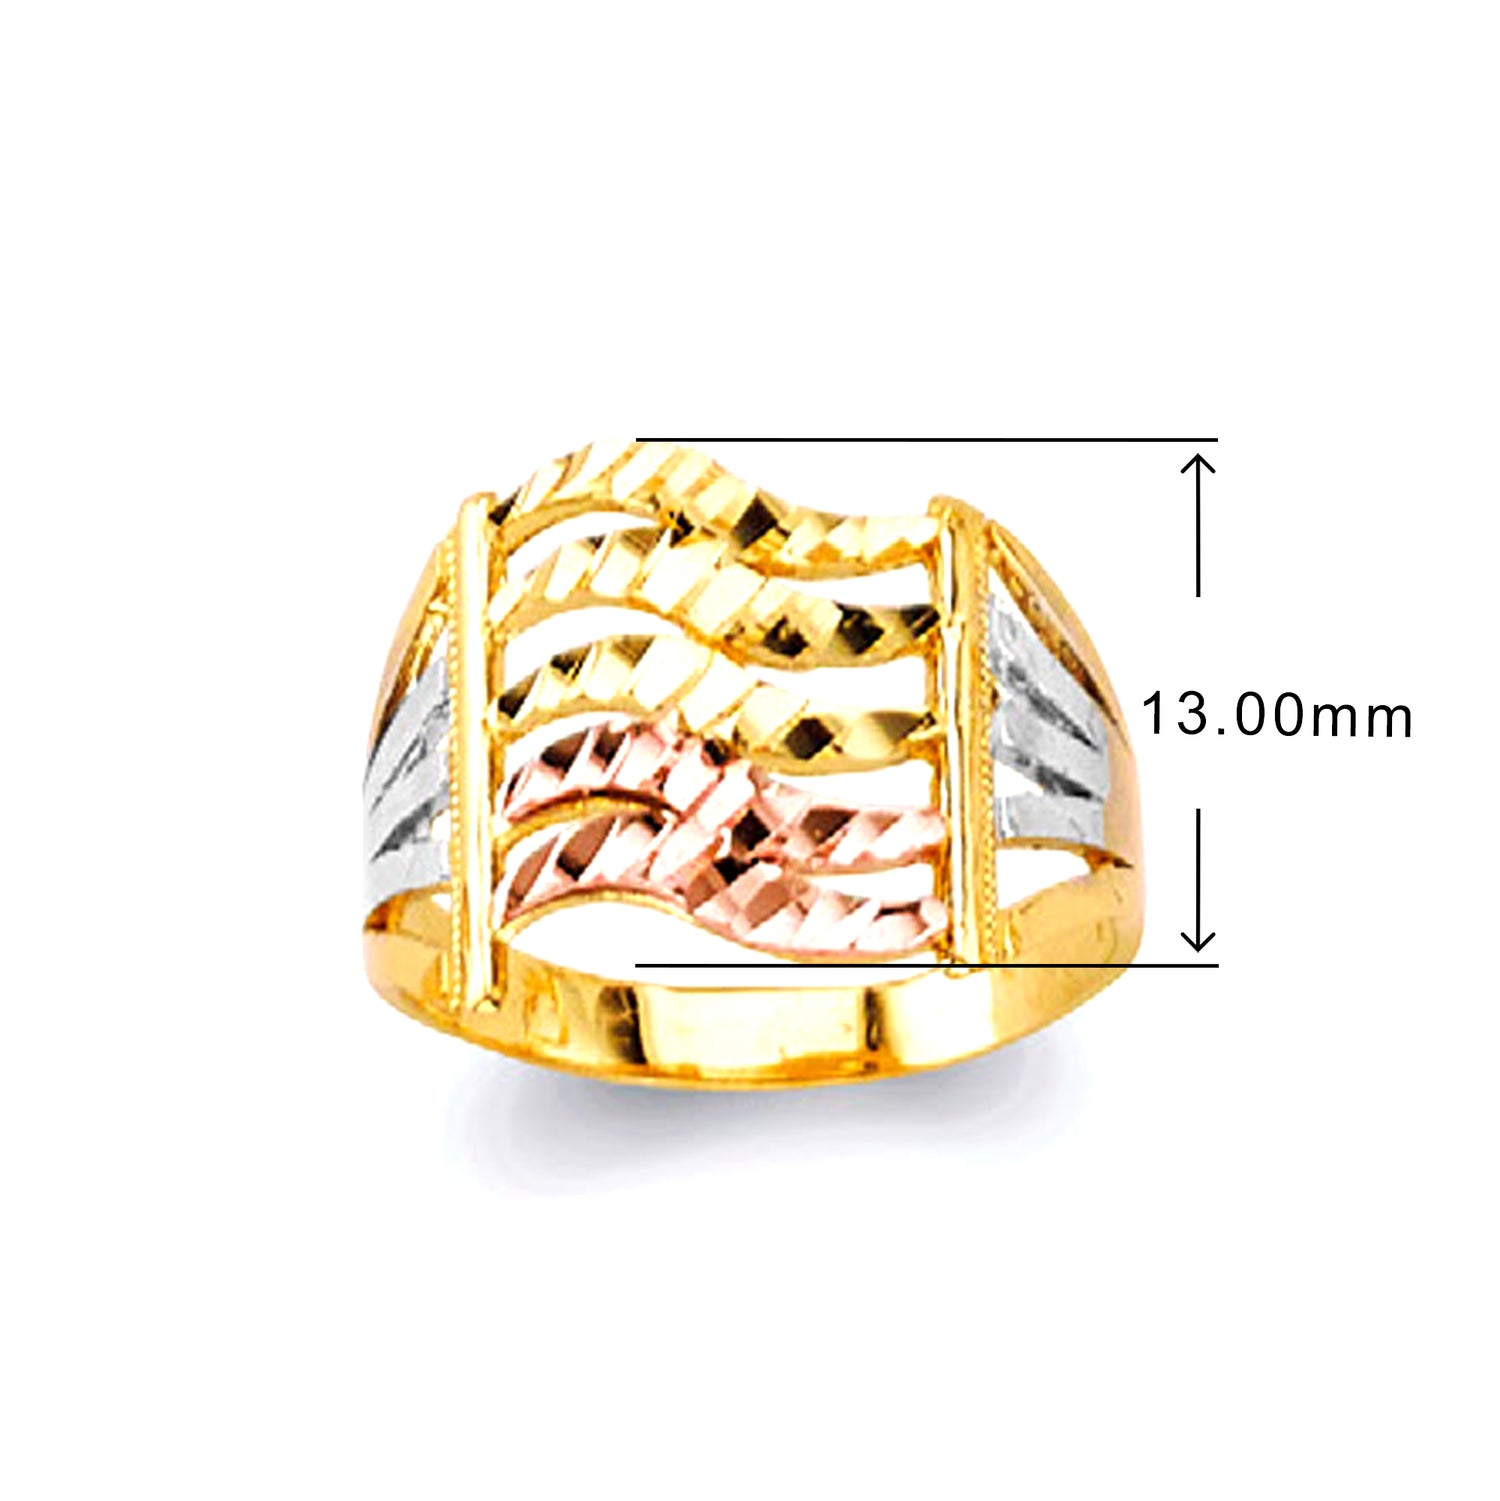 CZ Designer Spiral Ring in Solid Gold with Measurement